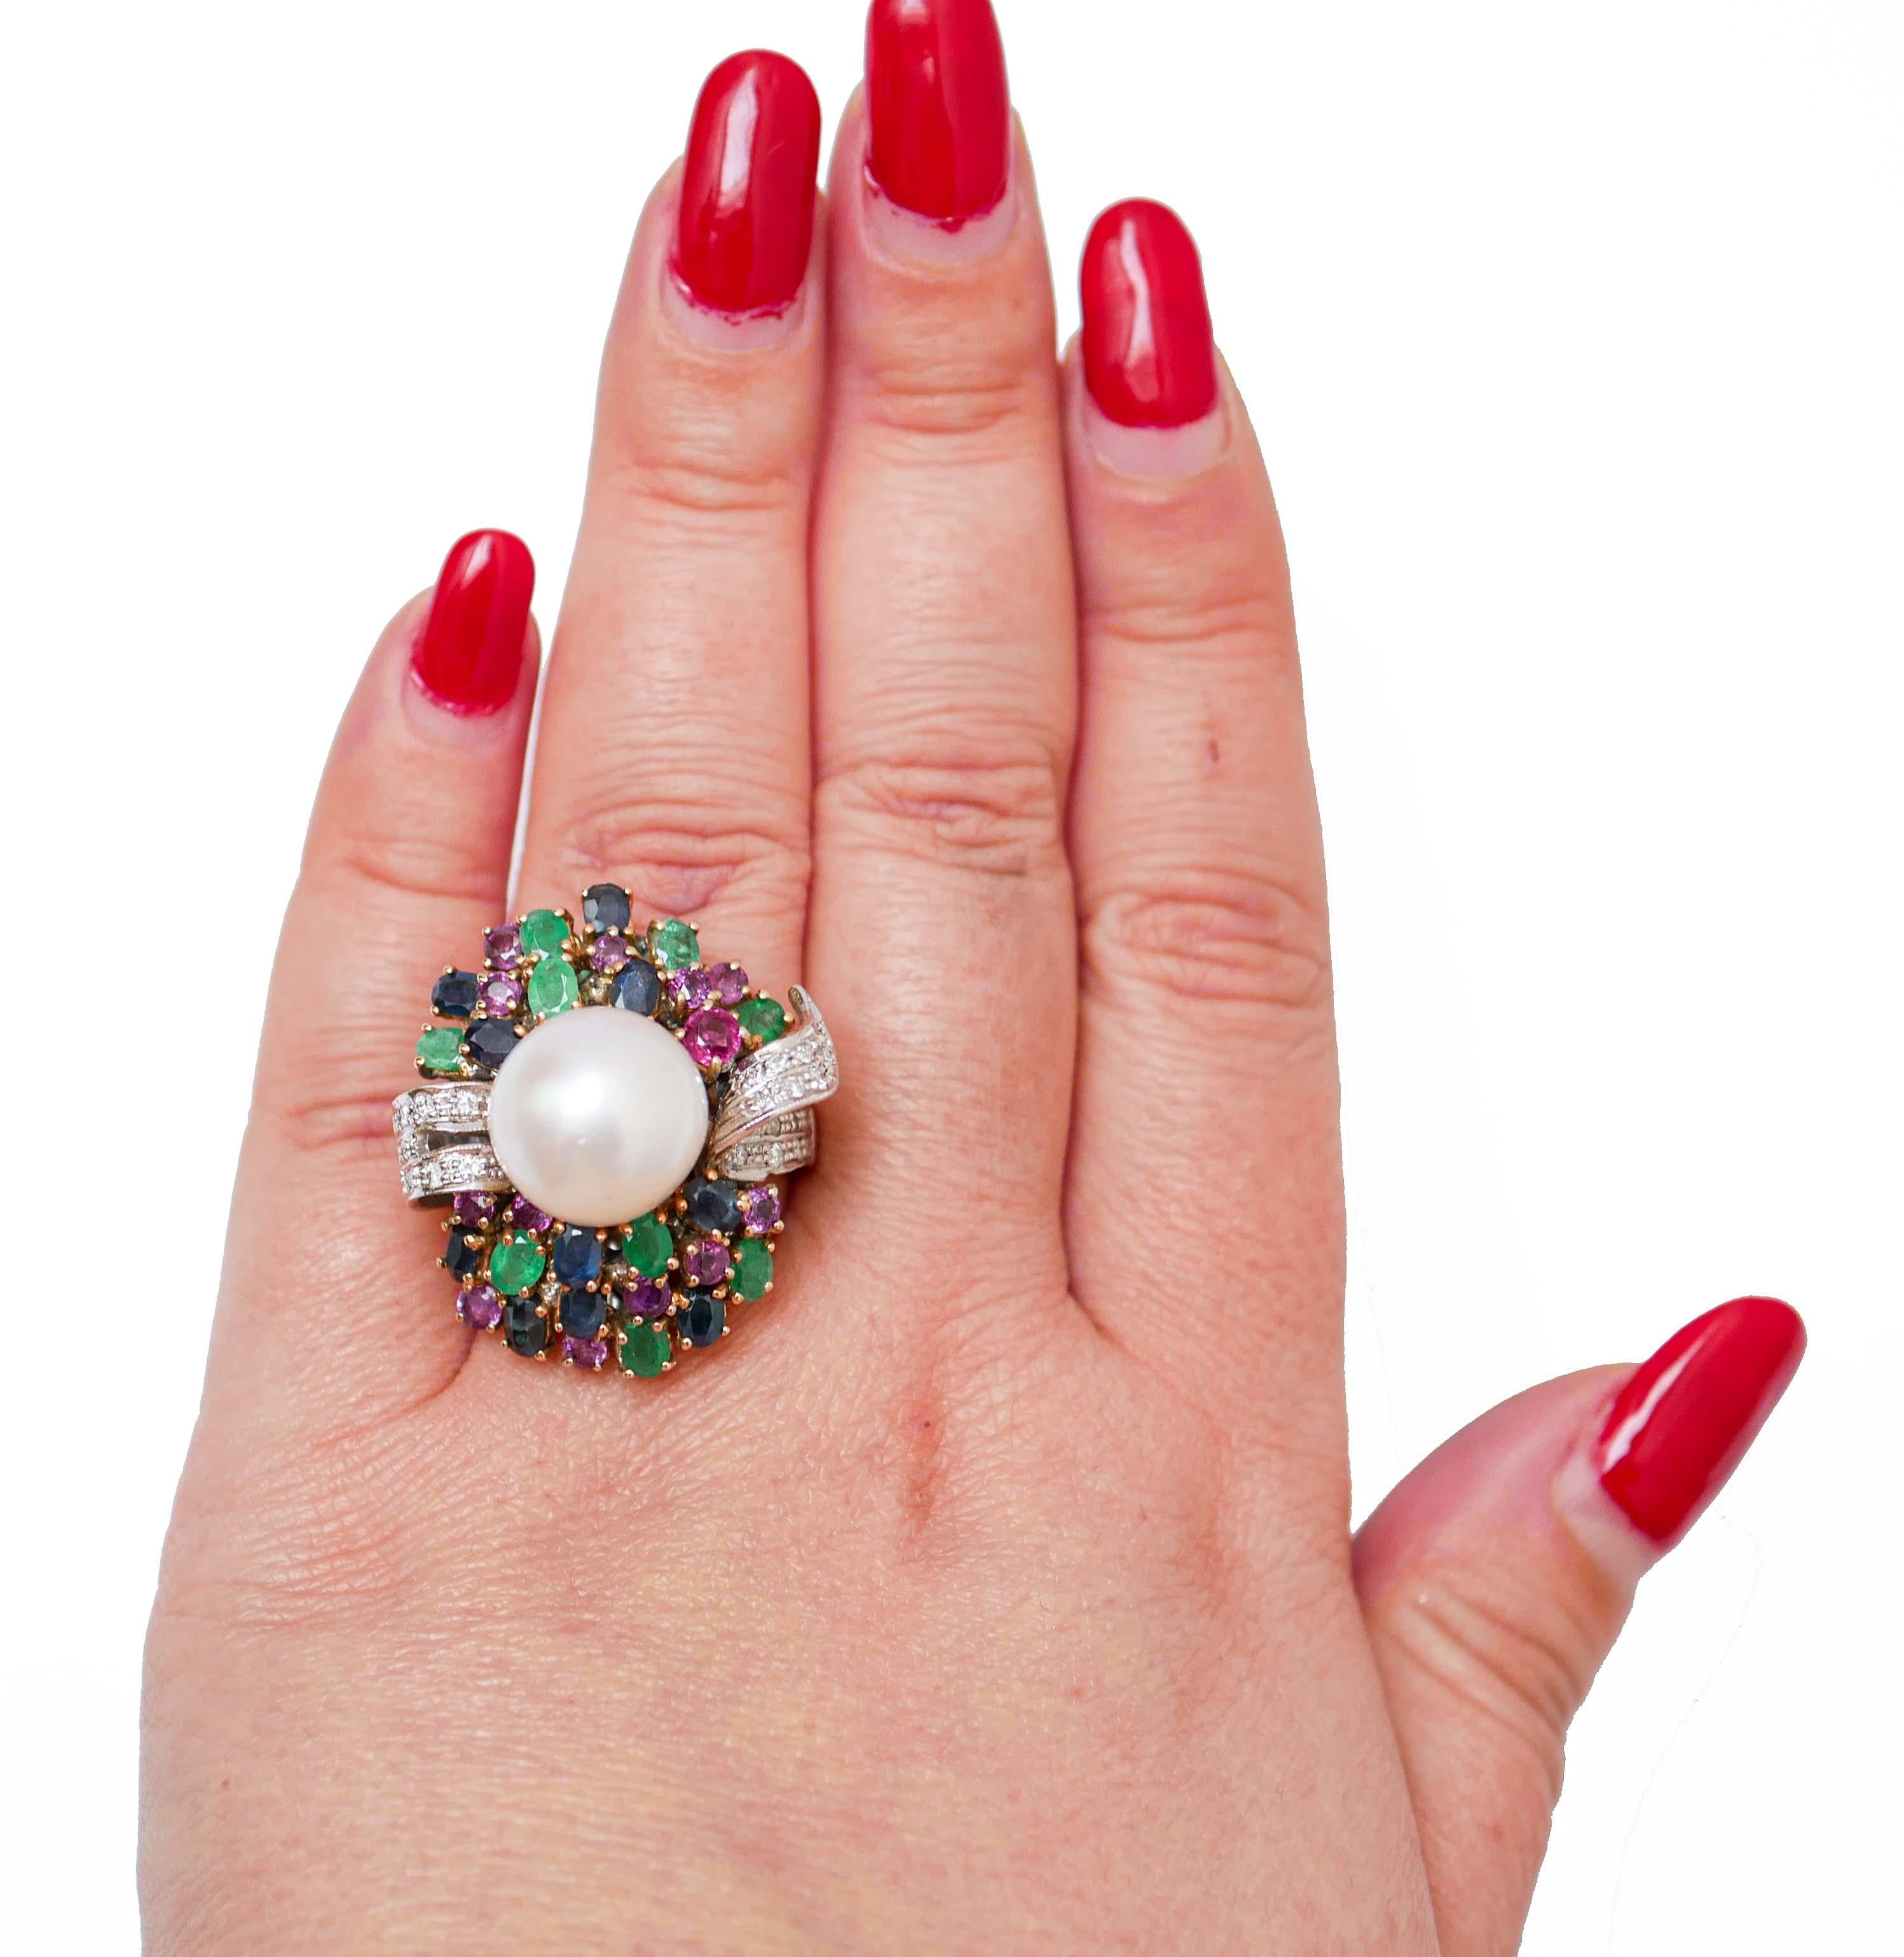 Mixed Cut South-Sea Pearls, Emeralds, Rubies, Sapphires, Diamonds, 14 Kt White Gold Ring. For Sale